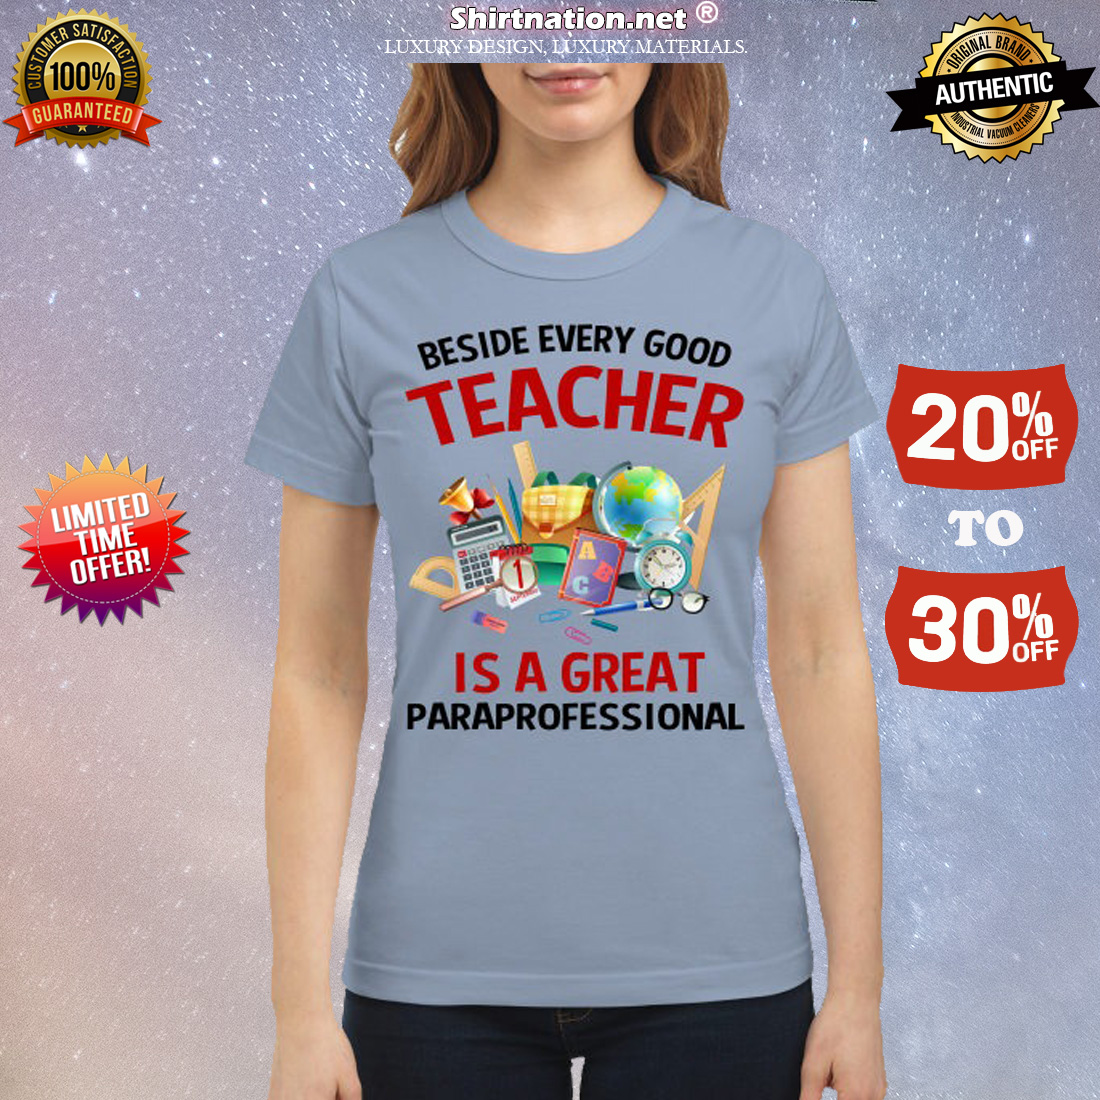 Beside every good teacher is a great paraprofessional classic shirt